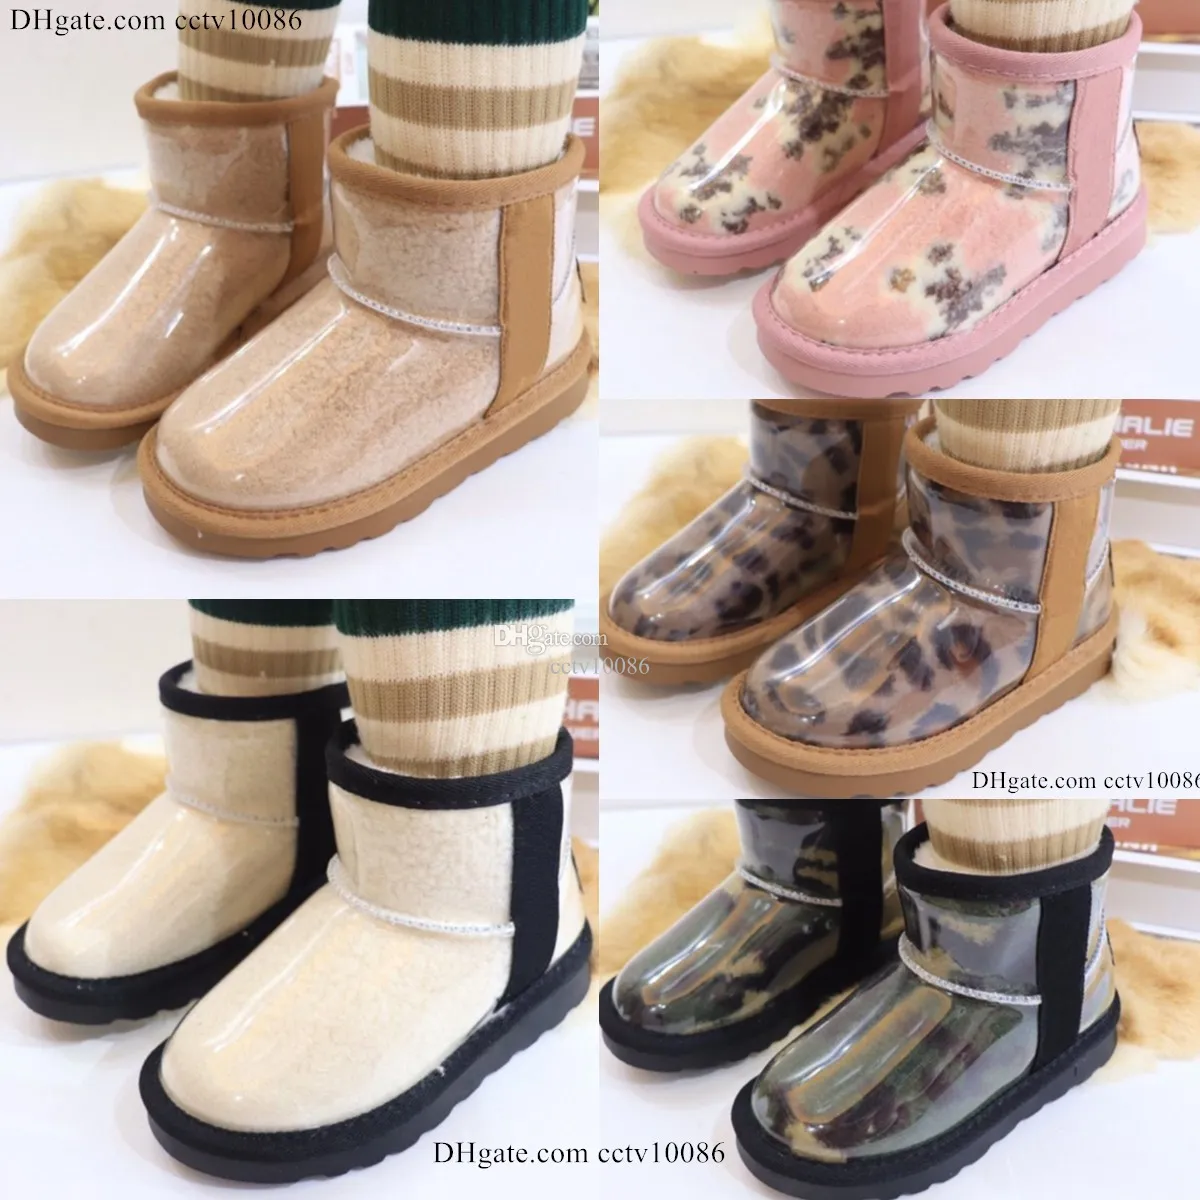 Australien Classic Mini Boots Clear Kids Uggi Shoes Girls Designer Jelly Toddler Ug Baby Barn Winter Snow Boot Kid Youth Sneaker WGGS Shoe Natural G5ea#